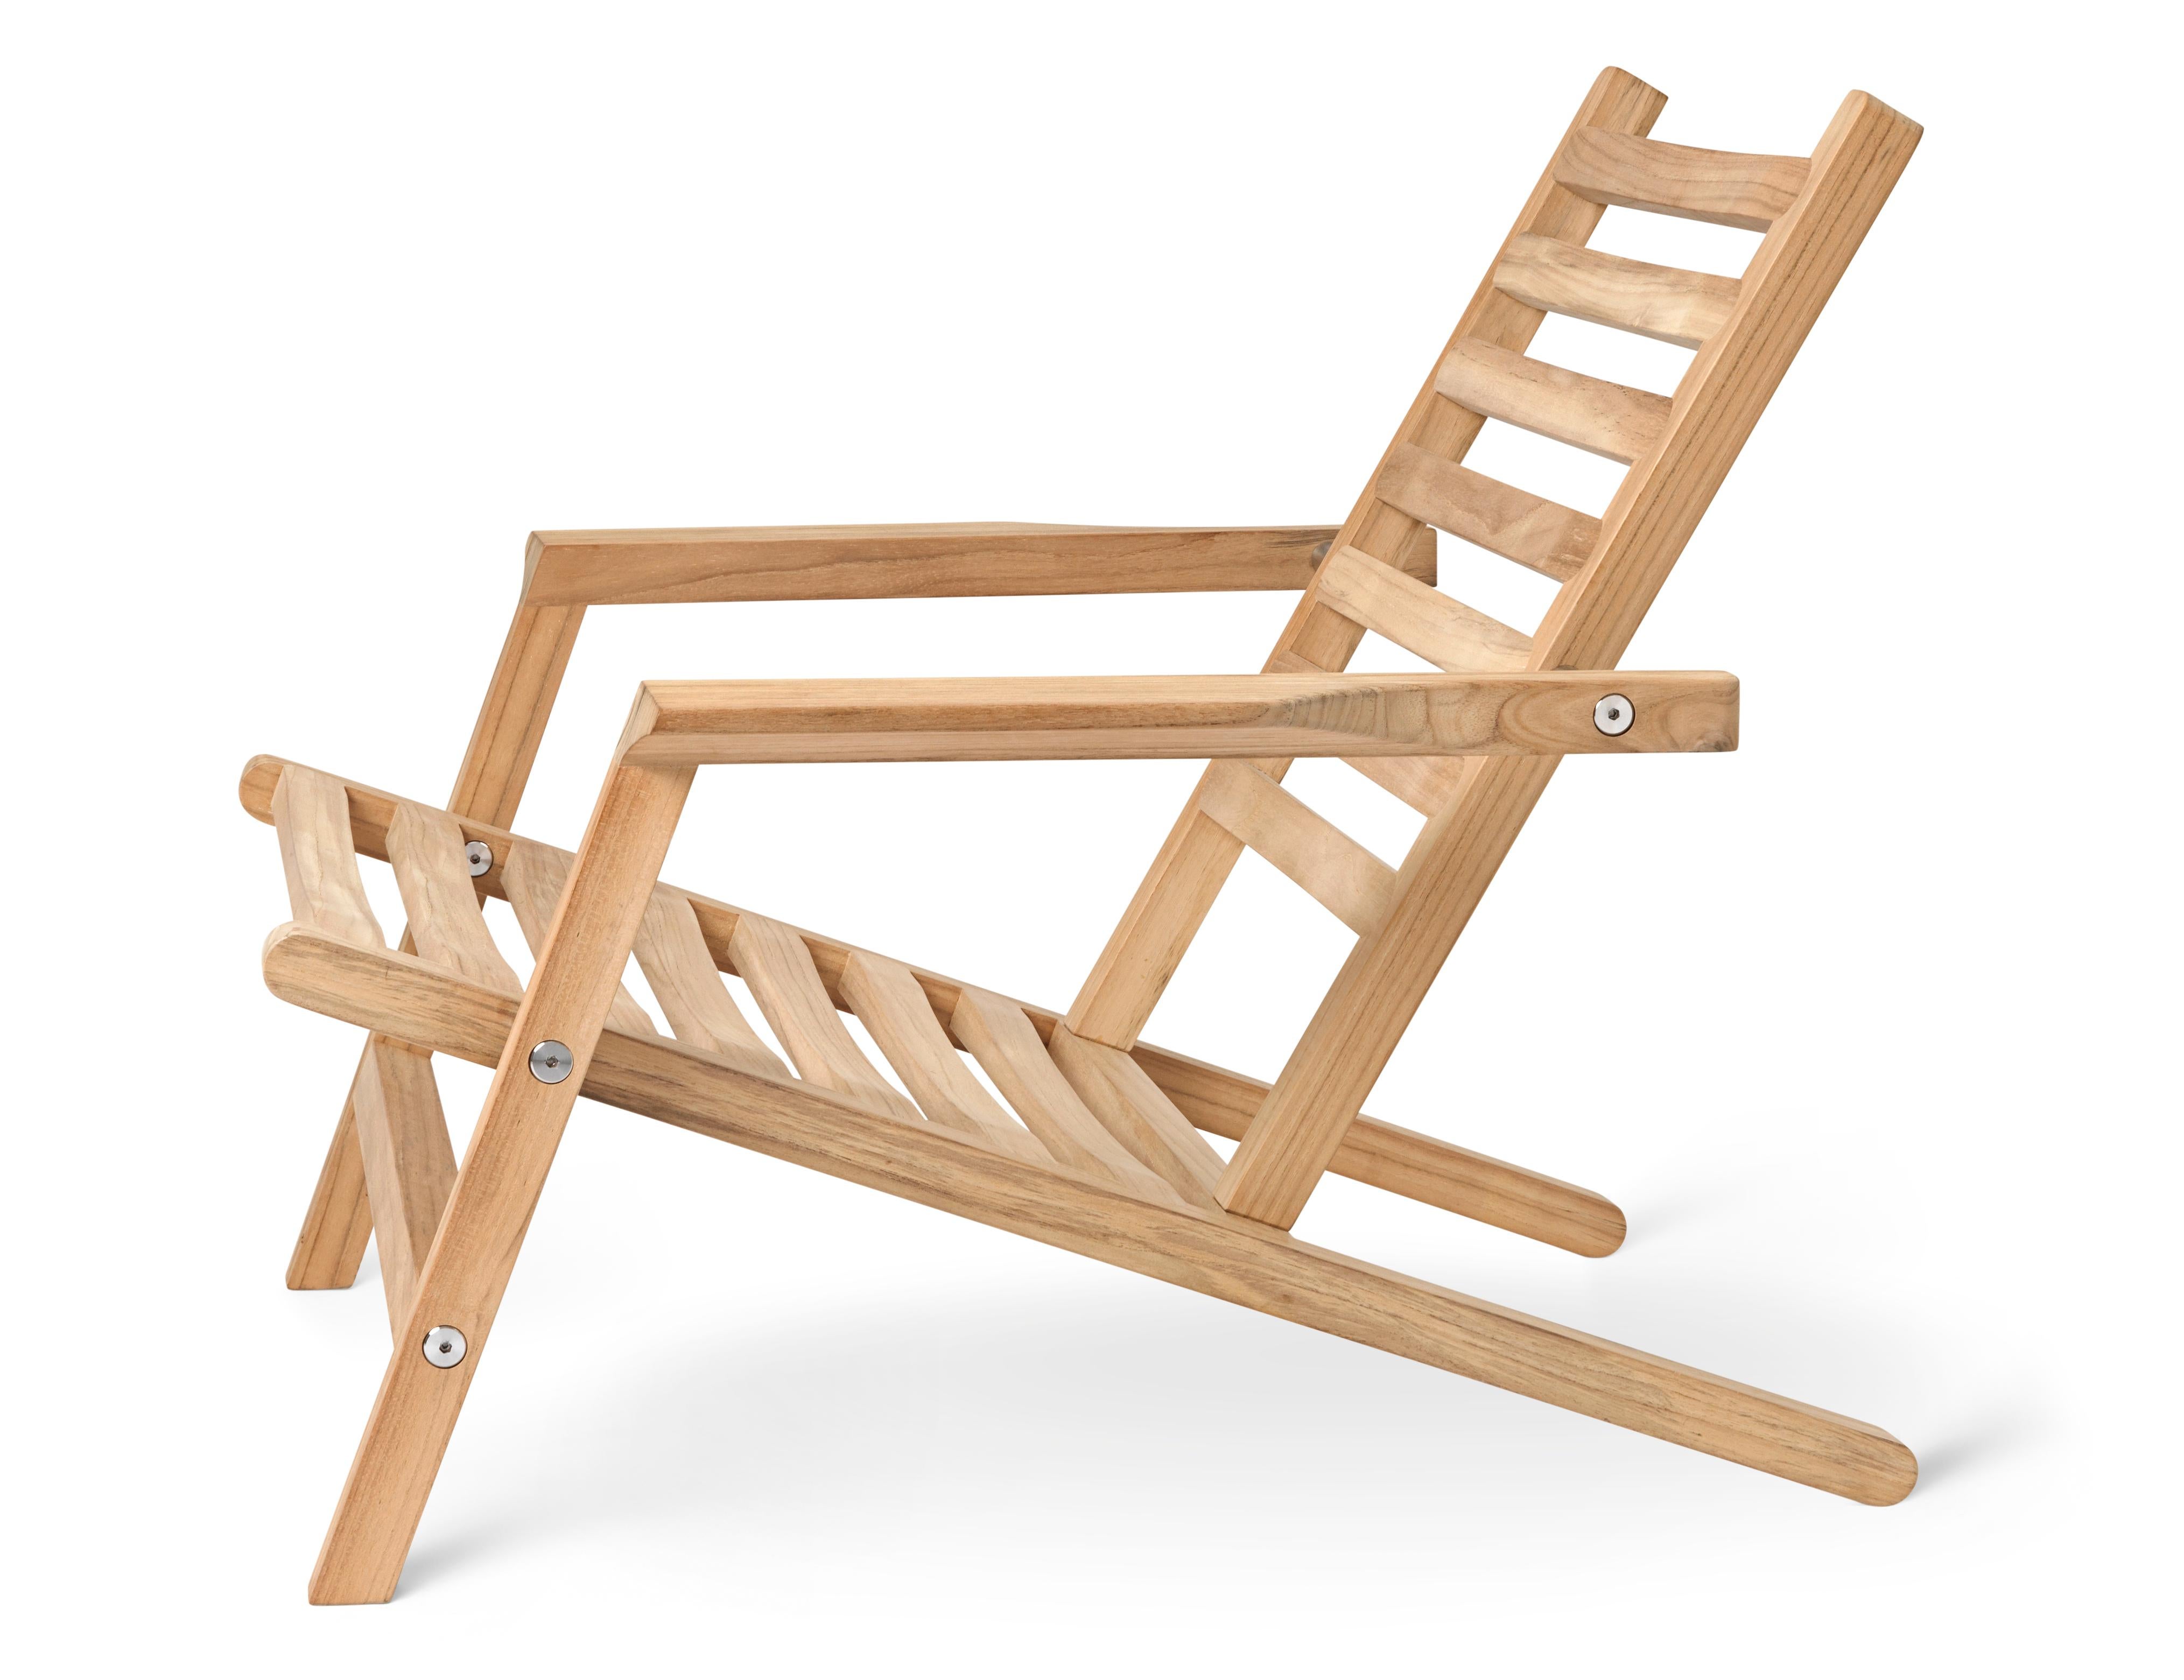 The comfortable Outdoor Deck chair is part of the AH Outdoor series, designed by Alfred Homann in 2022. Like the other outdoor furniture in the series, the deck chair is characterized by strict lines elegantly combined with soft, rounded details.